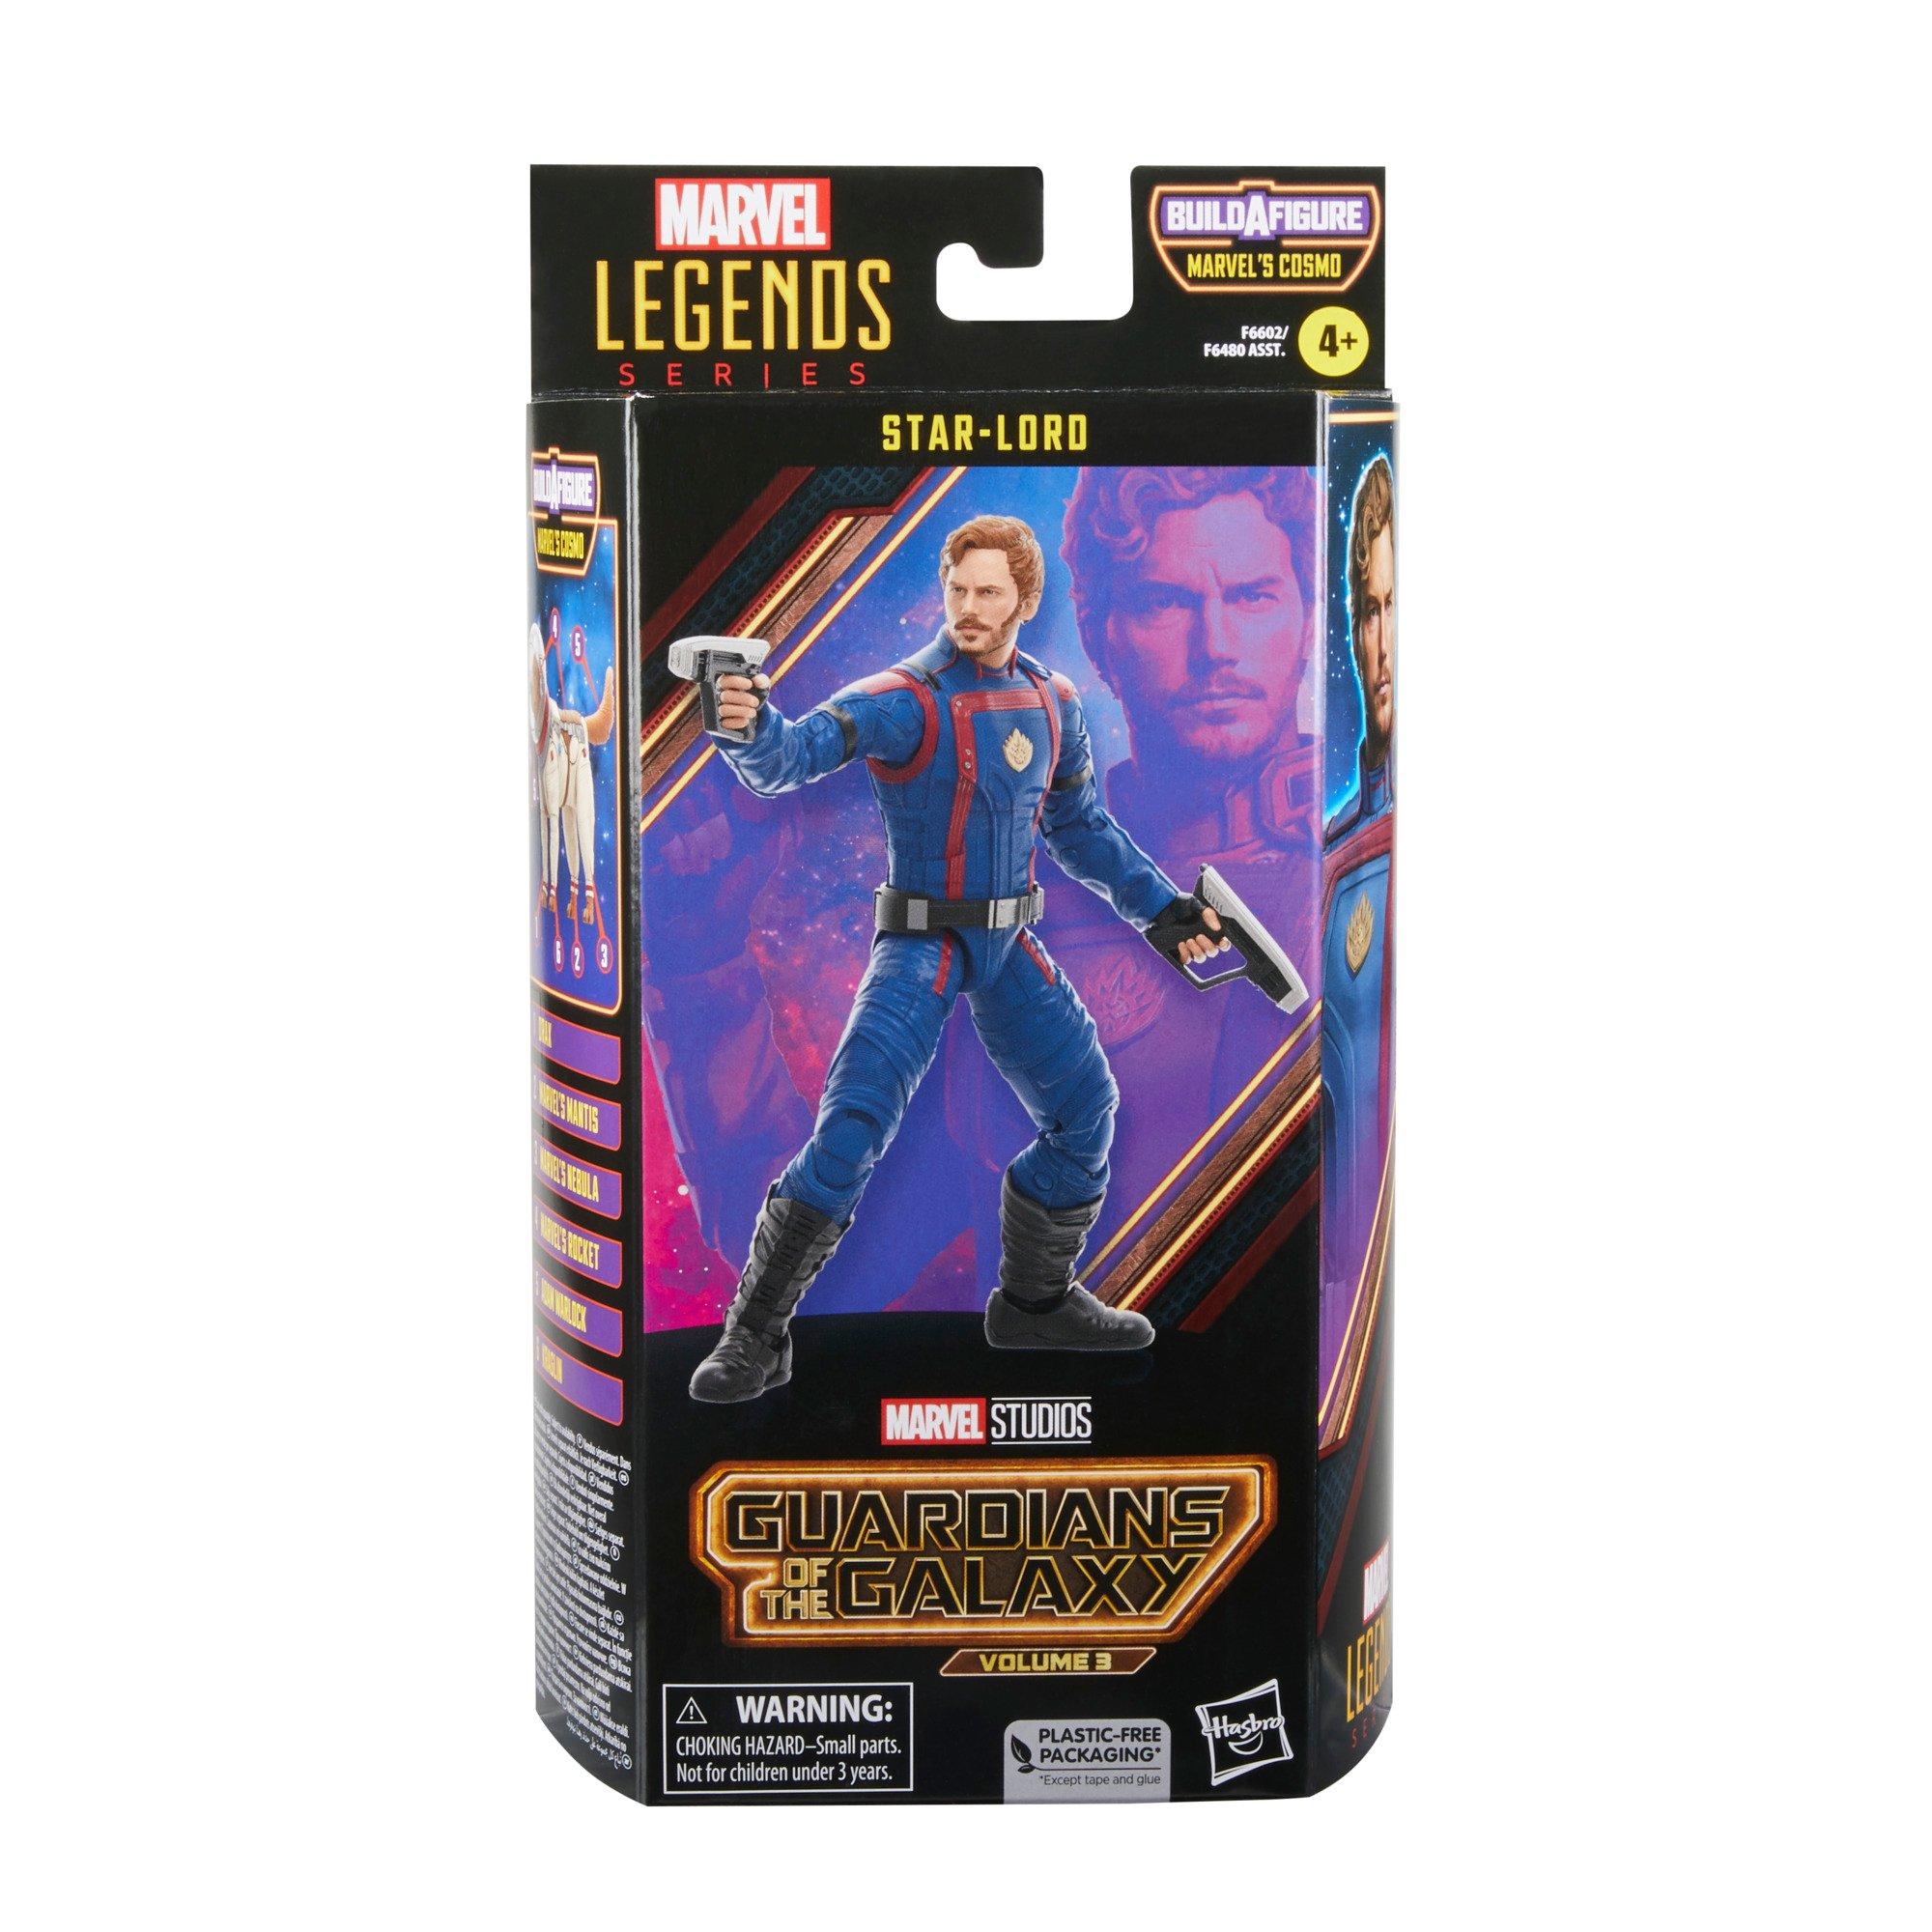 Marvel Legends Exclusives Star-Lord (Comics)